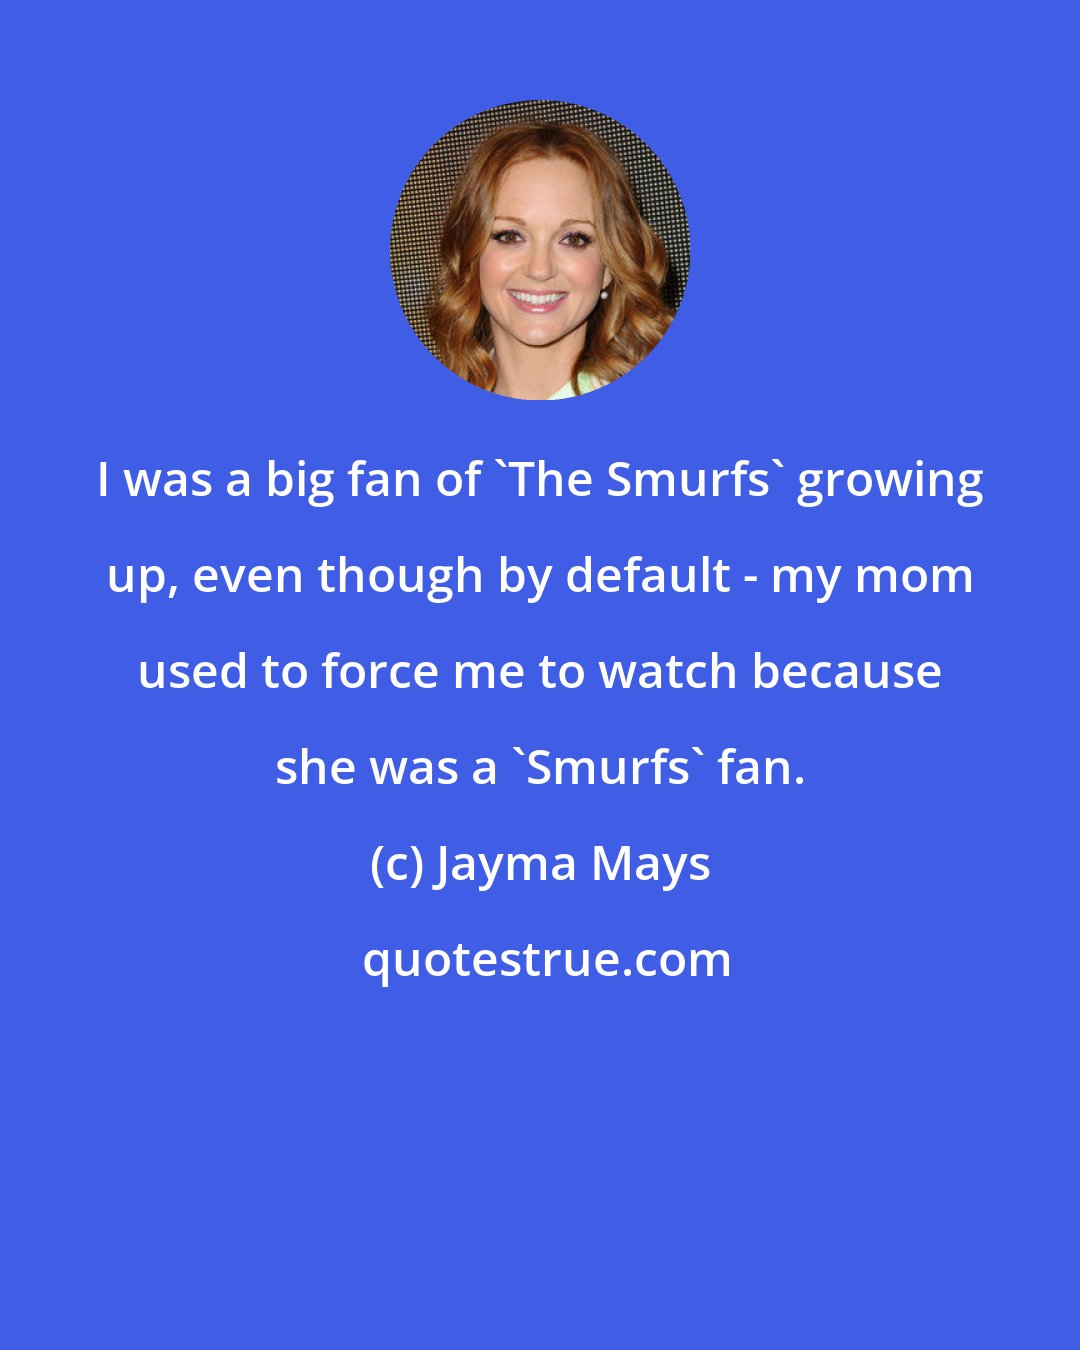 Jayma Mays: I was a big fan of 'The Smurfs' growing up, even though by default - my mom used to force me to watch because she was a 'Smurfs' fan.